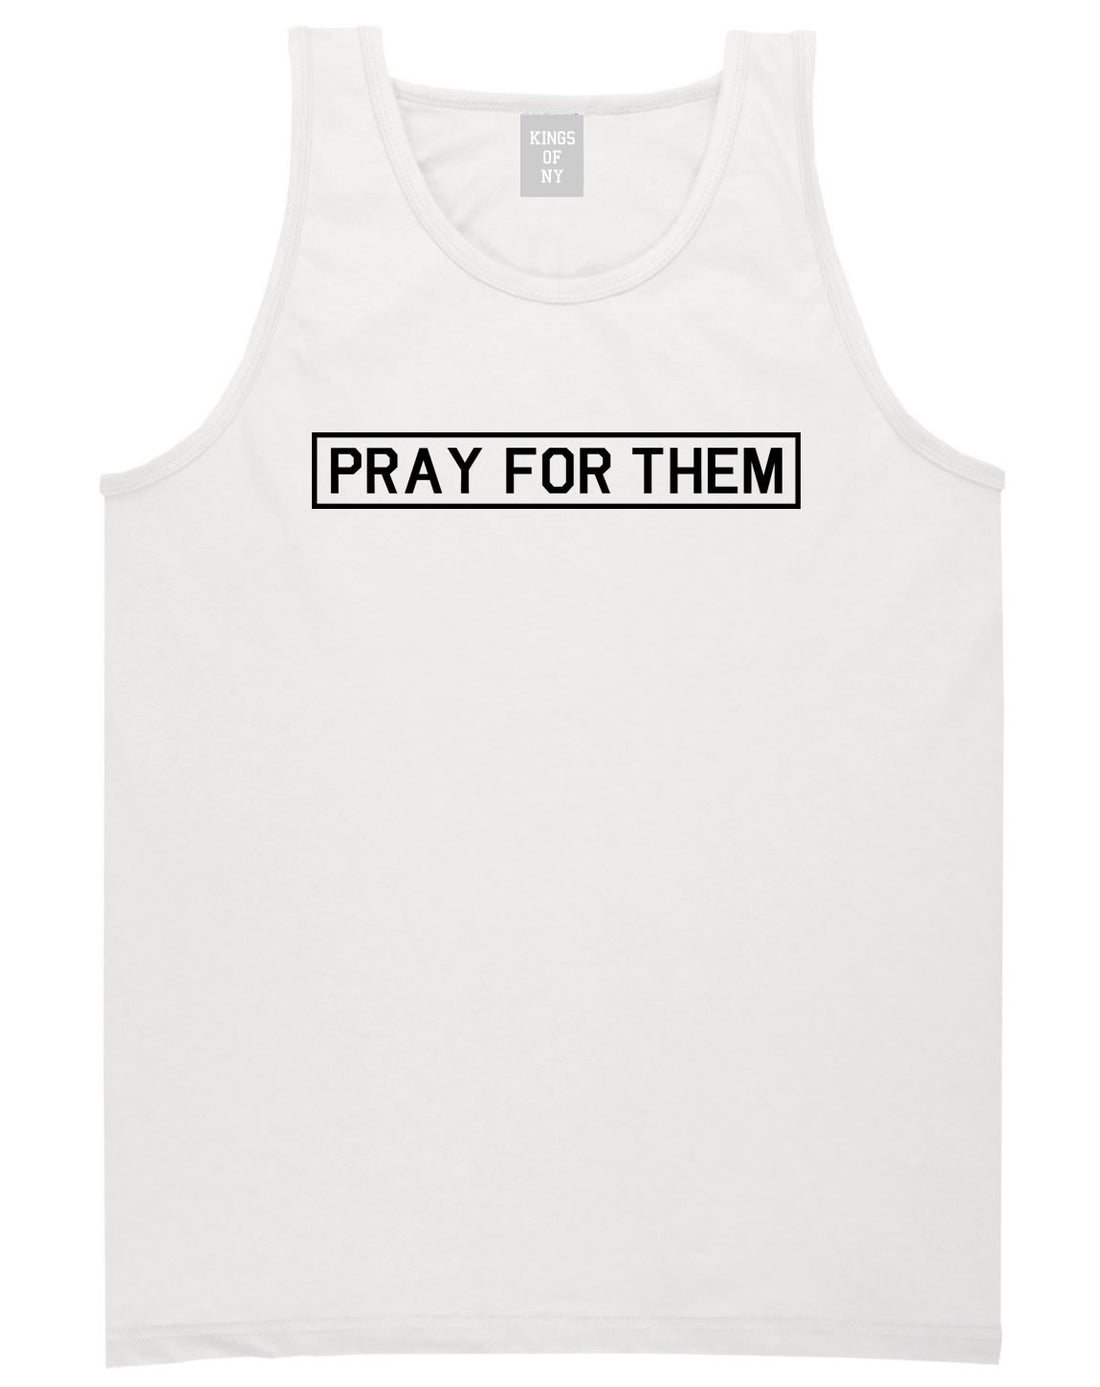 Pray For Them Fall15 Tank Top in White by Kings Of NY